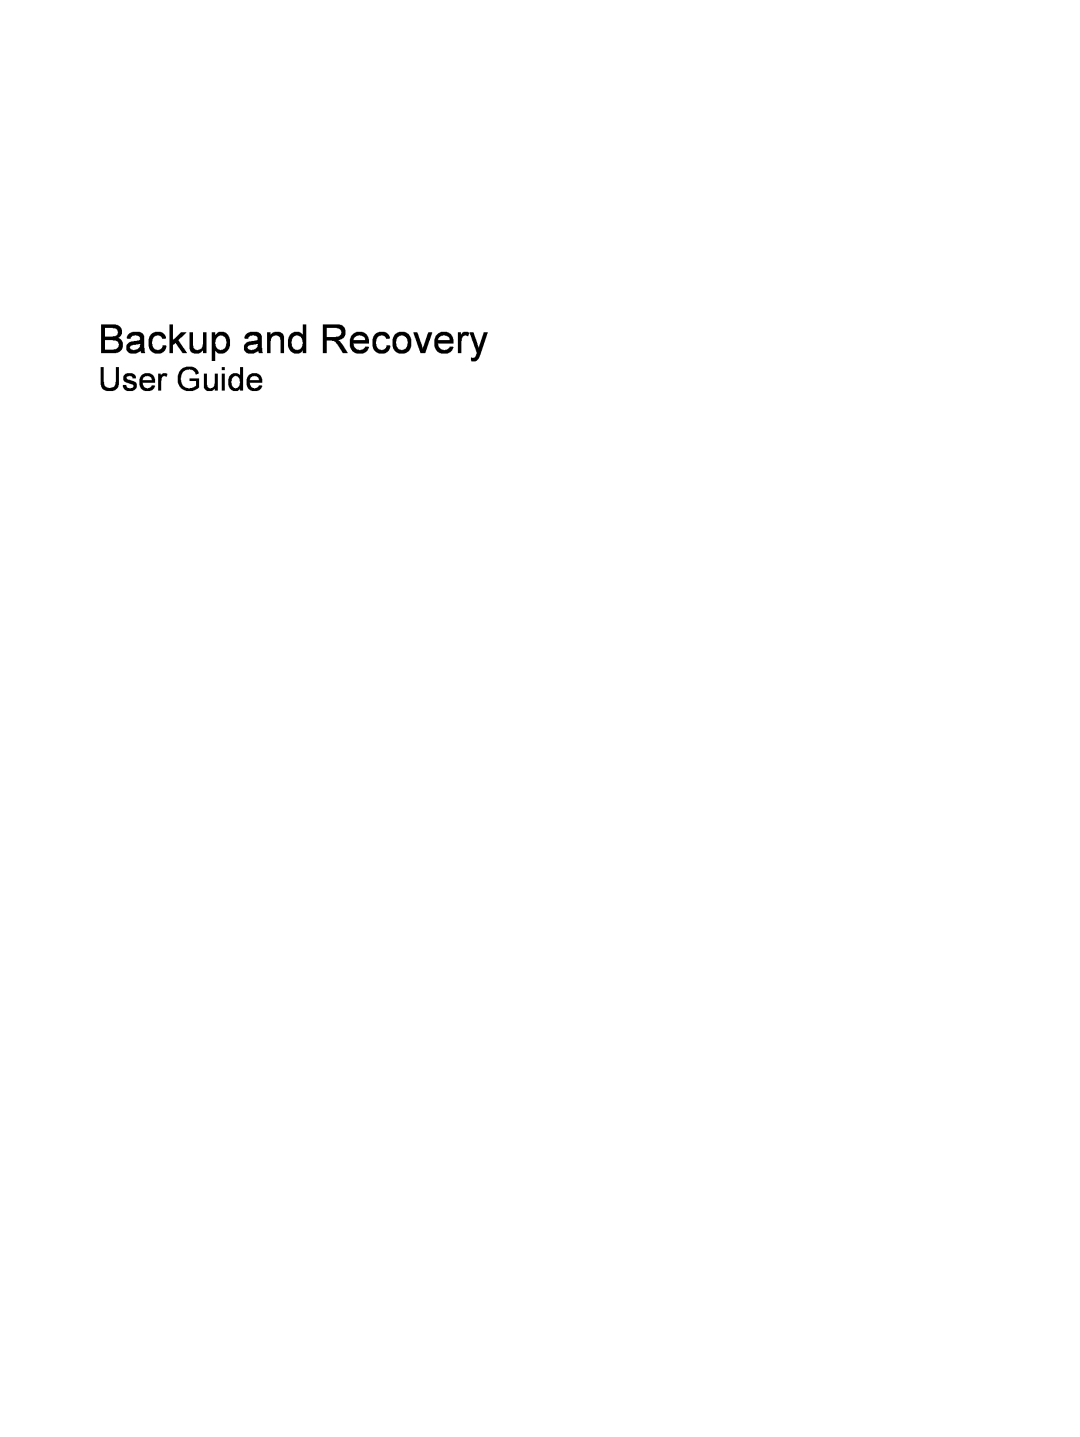 HP tx2-1305au, TX2-1375DX, tx2-1326au, tx2-1370us, tx2z-1300, tx2-1377nr, CQ41-206AU manual Backup and Recovery, User Guide 